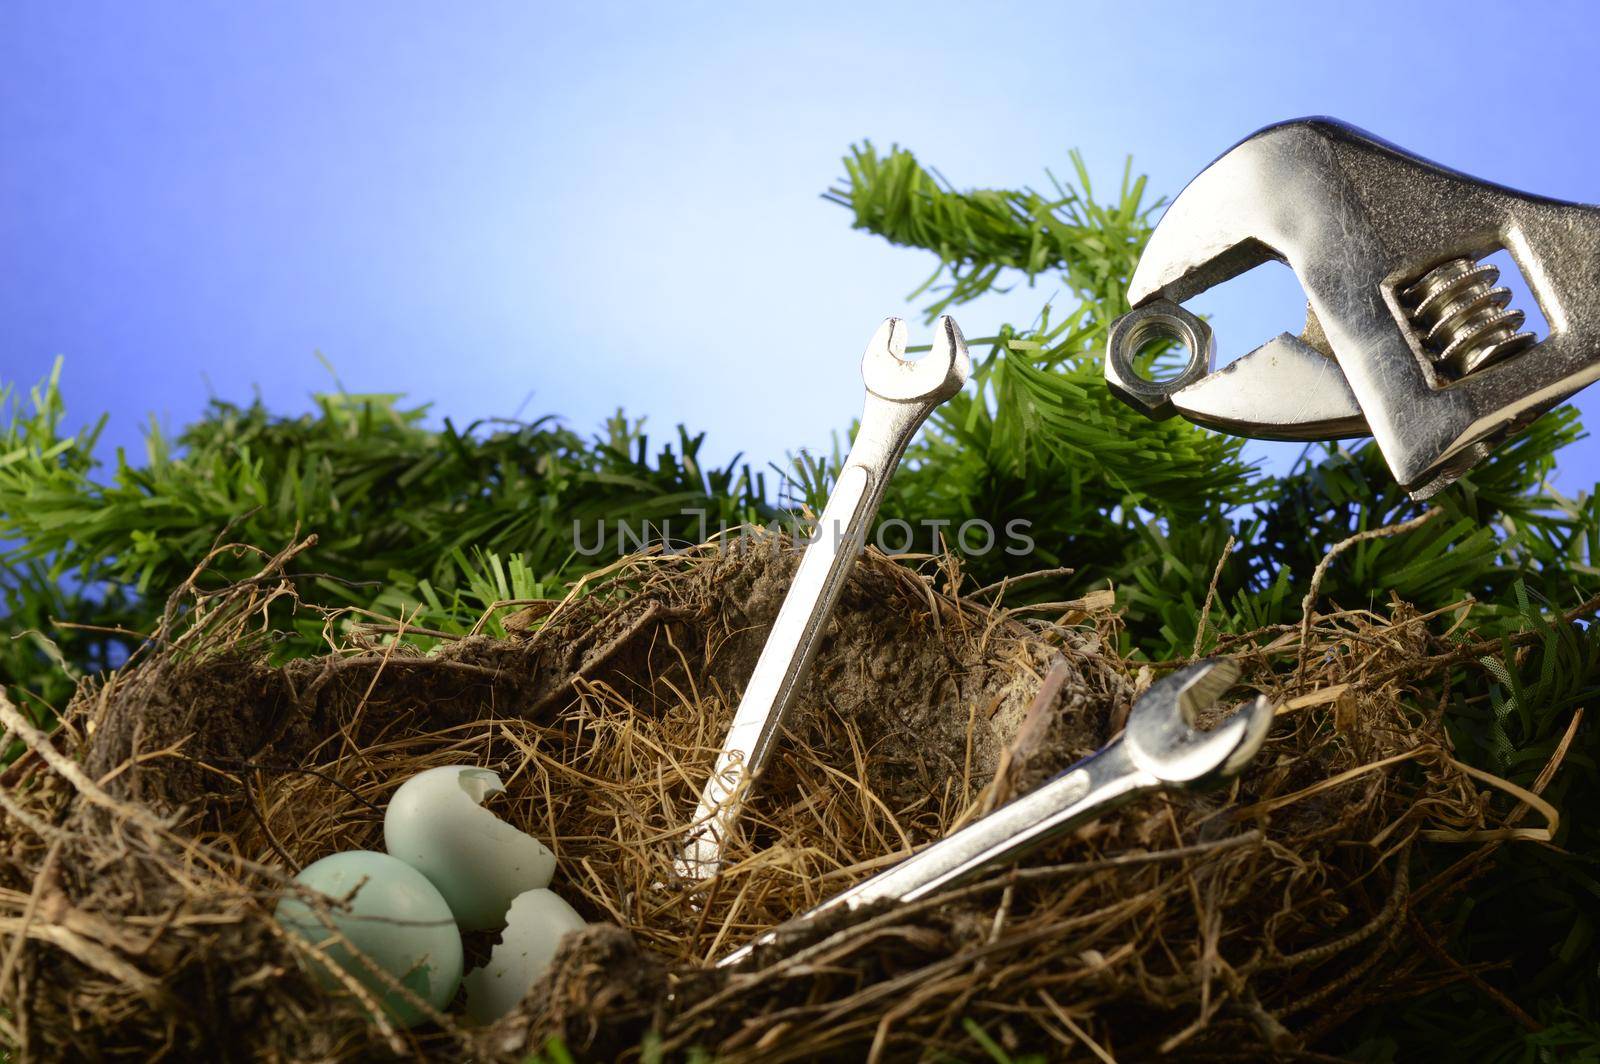 A conceptual image for feeding time at a birds nest using wrenches and a nut for food.